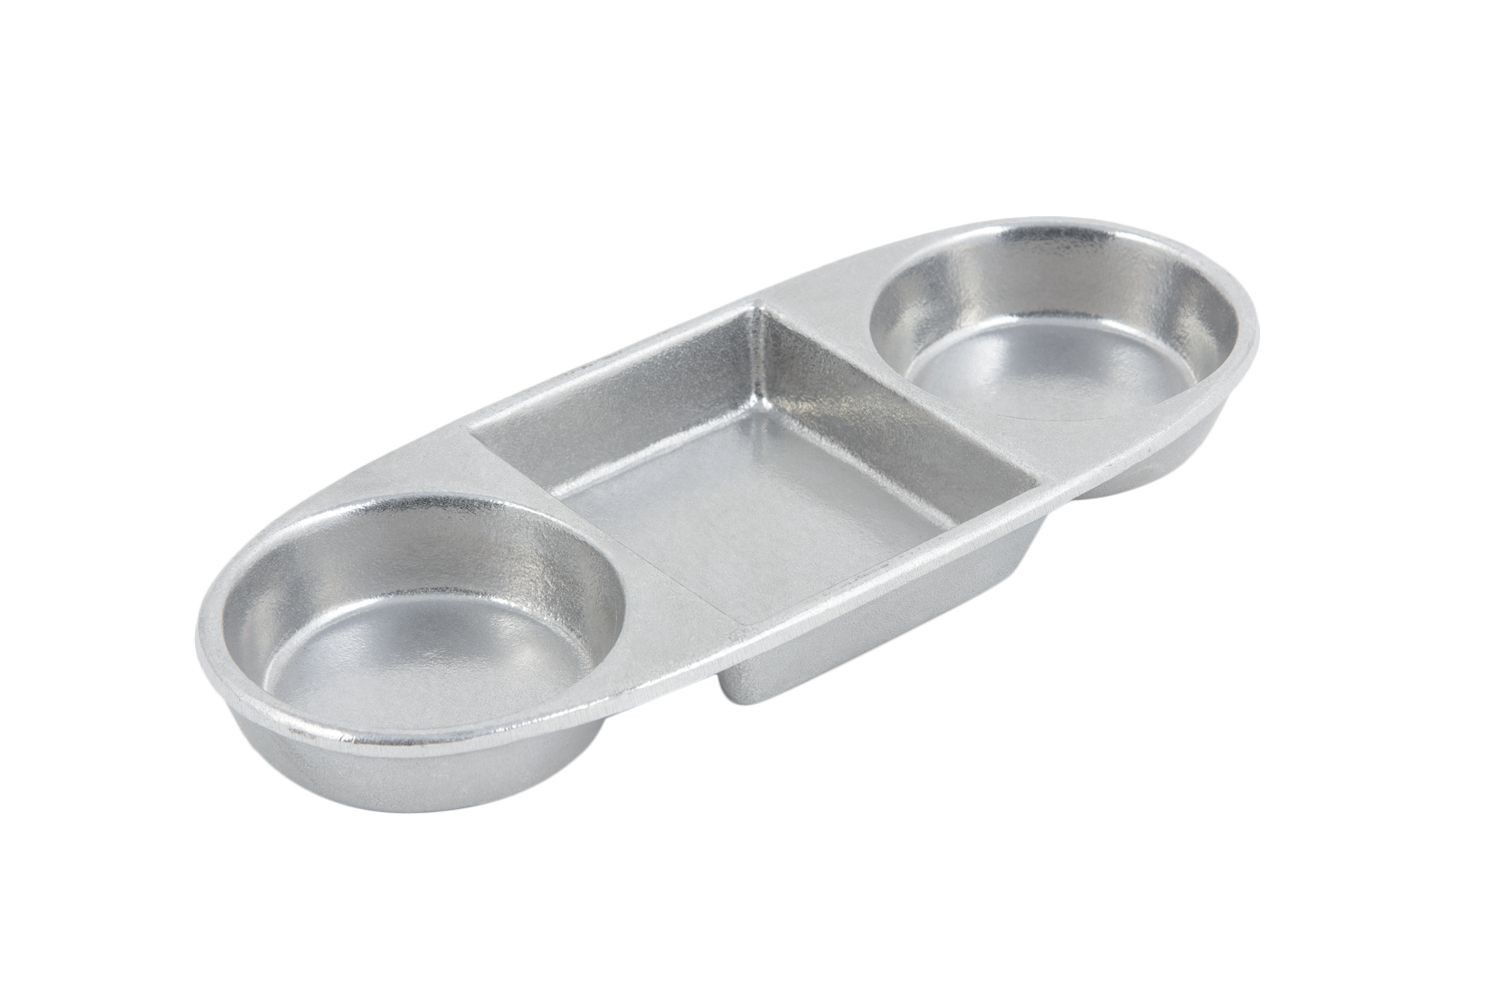 Bon Chef 9052P 3-Compartment Relish Tray, Pewter Glo 3 3/4" x 9 1/4", Set of 6